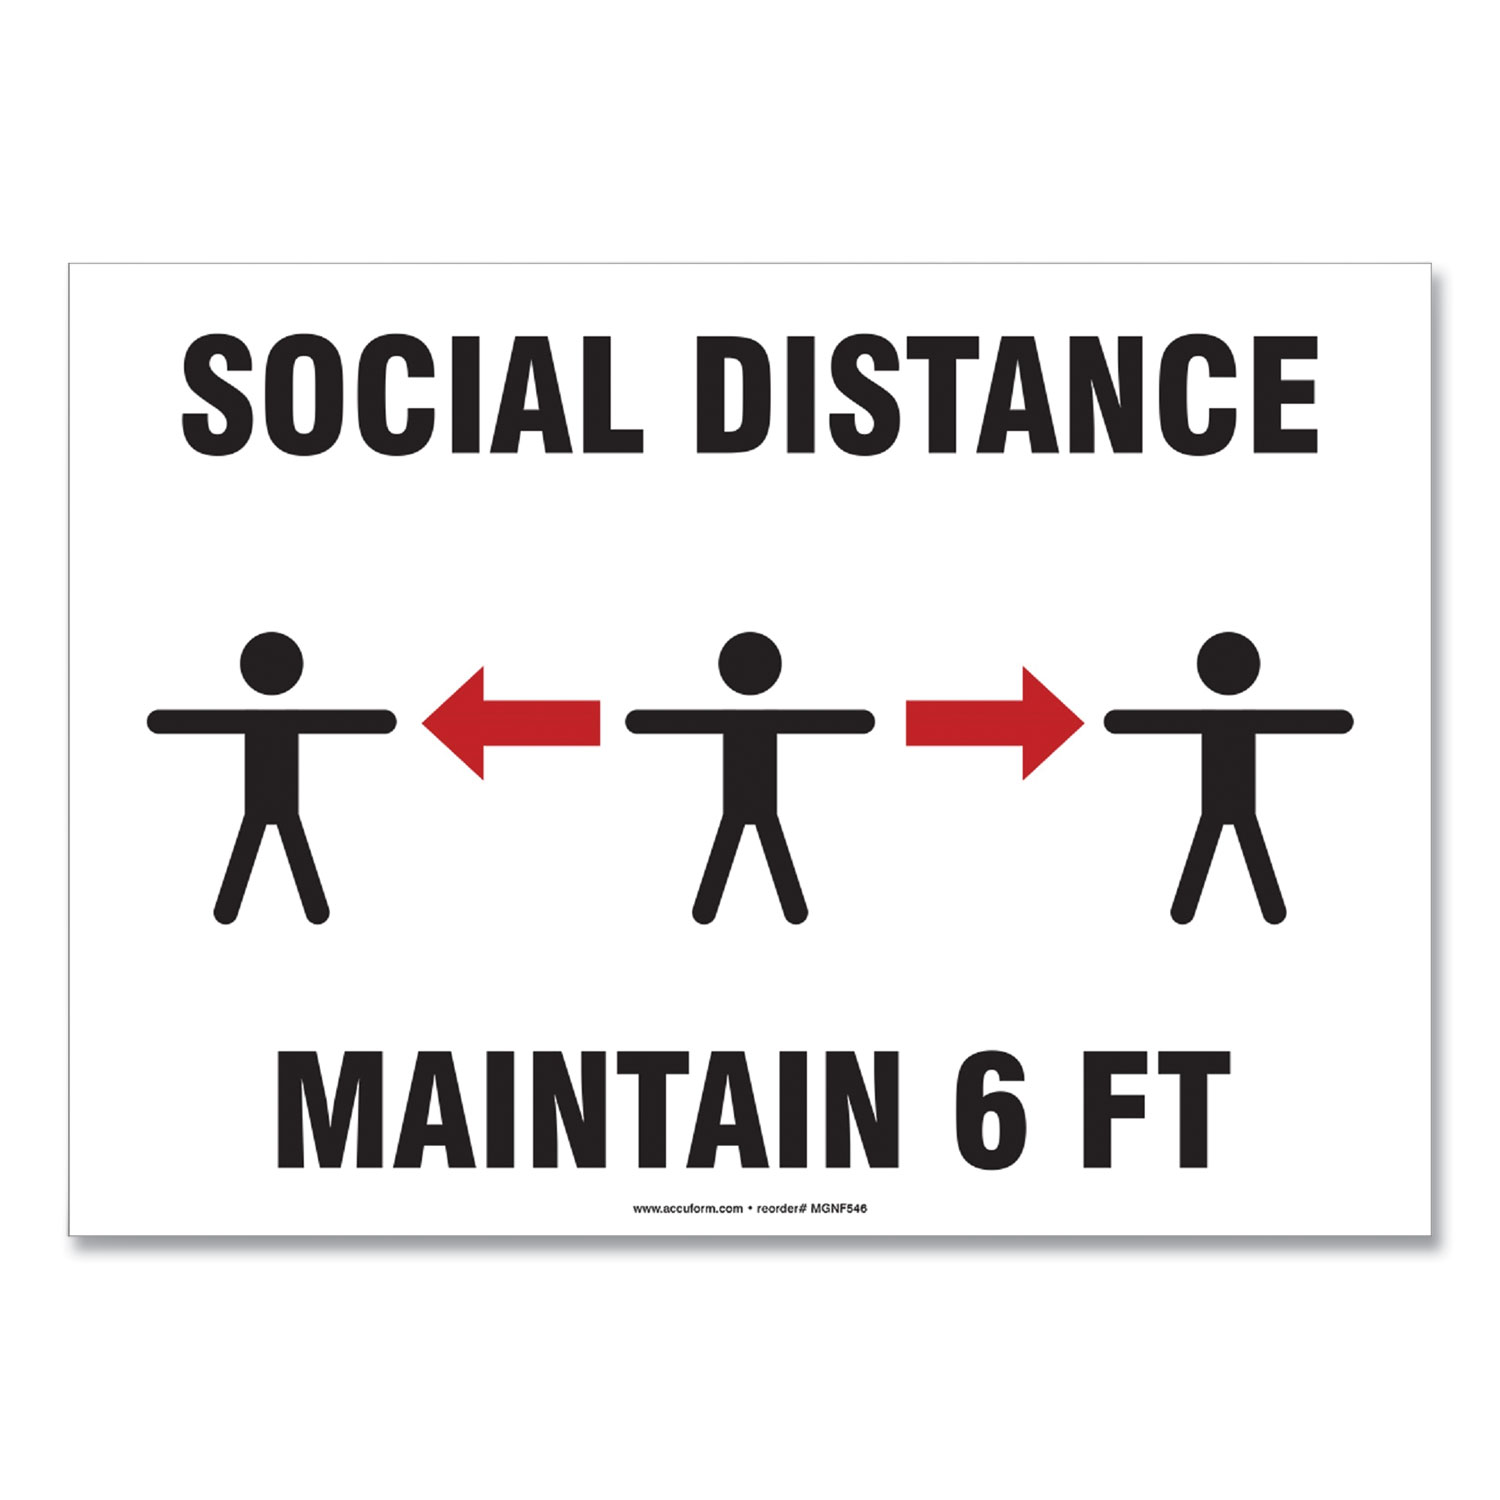  Accuform MGNF544VPESP Social Distance Signs, Wall, 10 x 7, Social Distance Maintain 6 ft, 3 Humans/Arrows, White, 10/Pack (GN1MGNF544VPESP) 